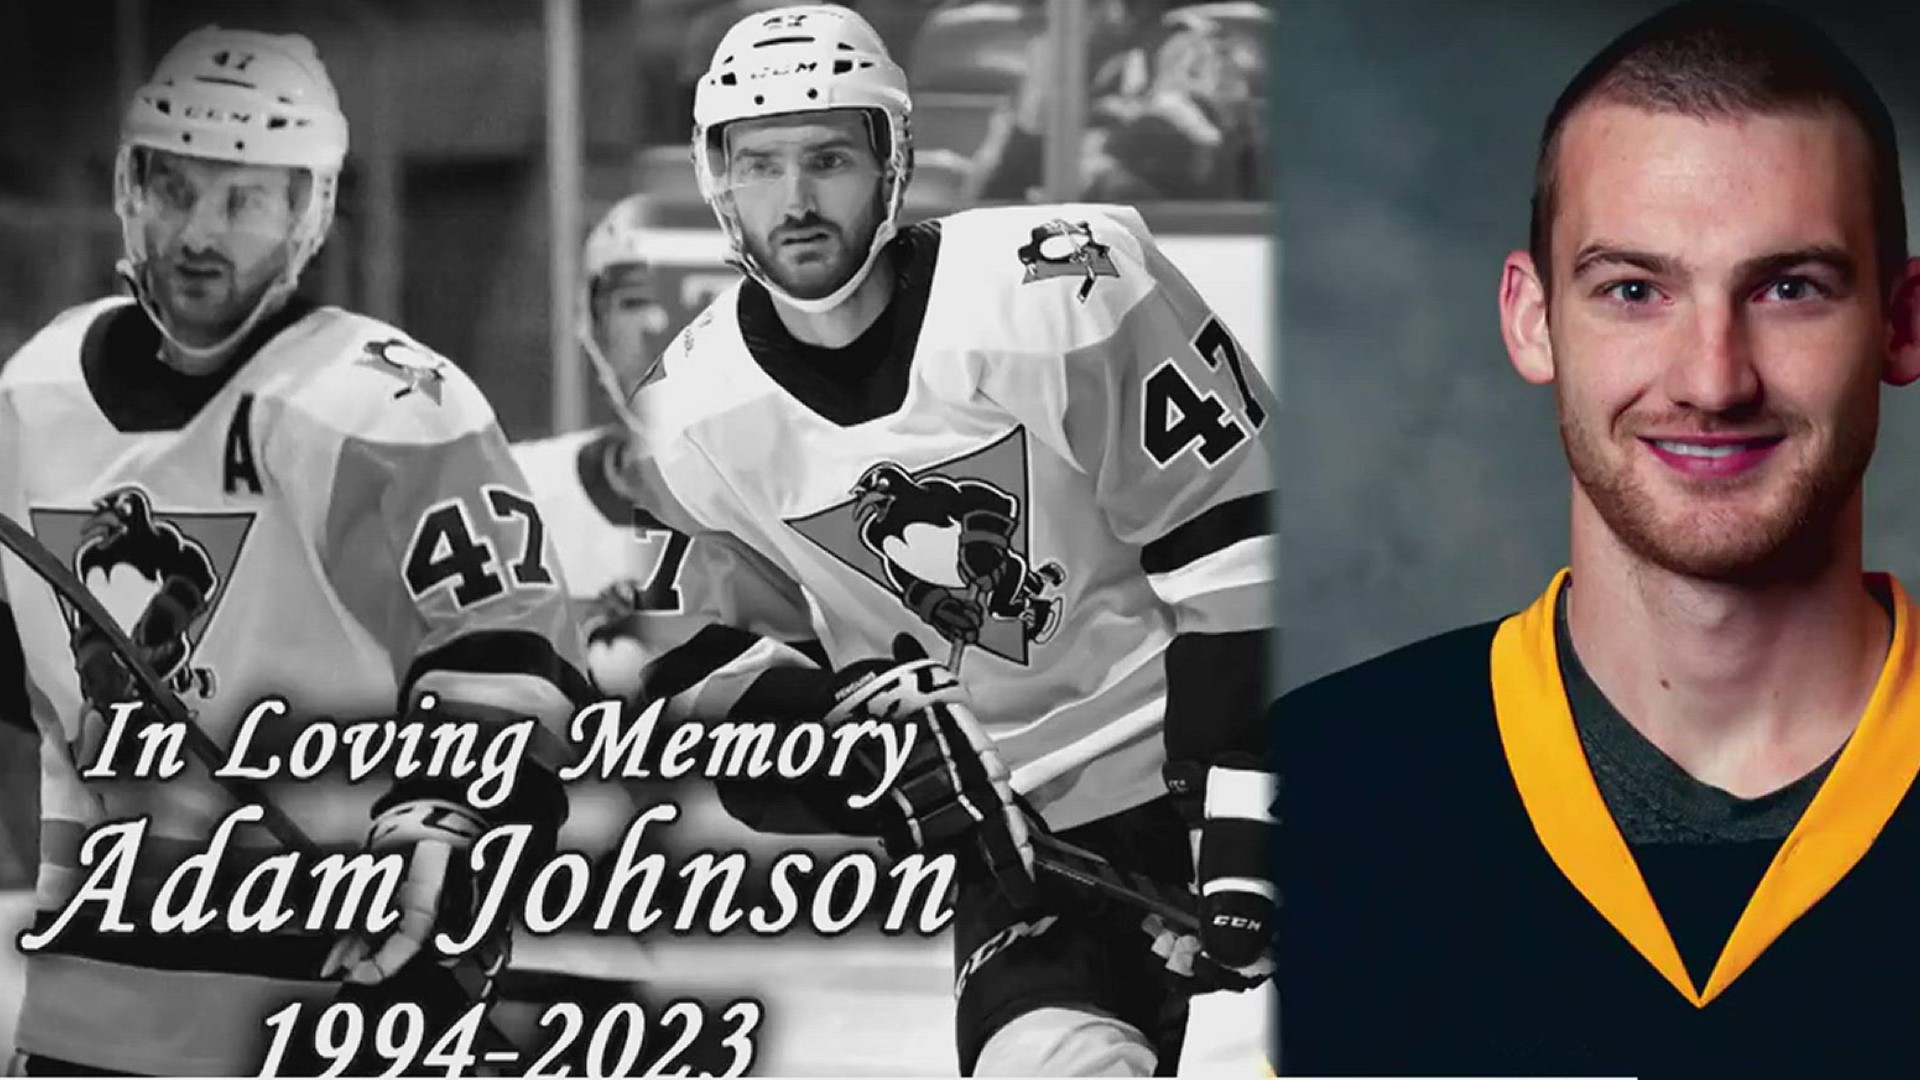 Police in England have arrested a man on suspicion of manslaughter in the death of American ice hockey player Adam Johnson whose neck was cut by a skate.